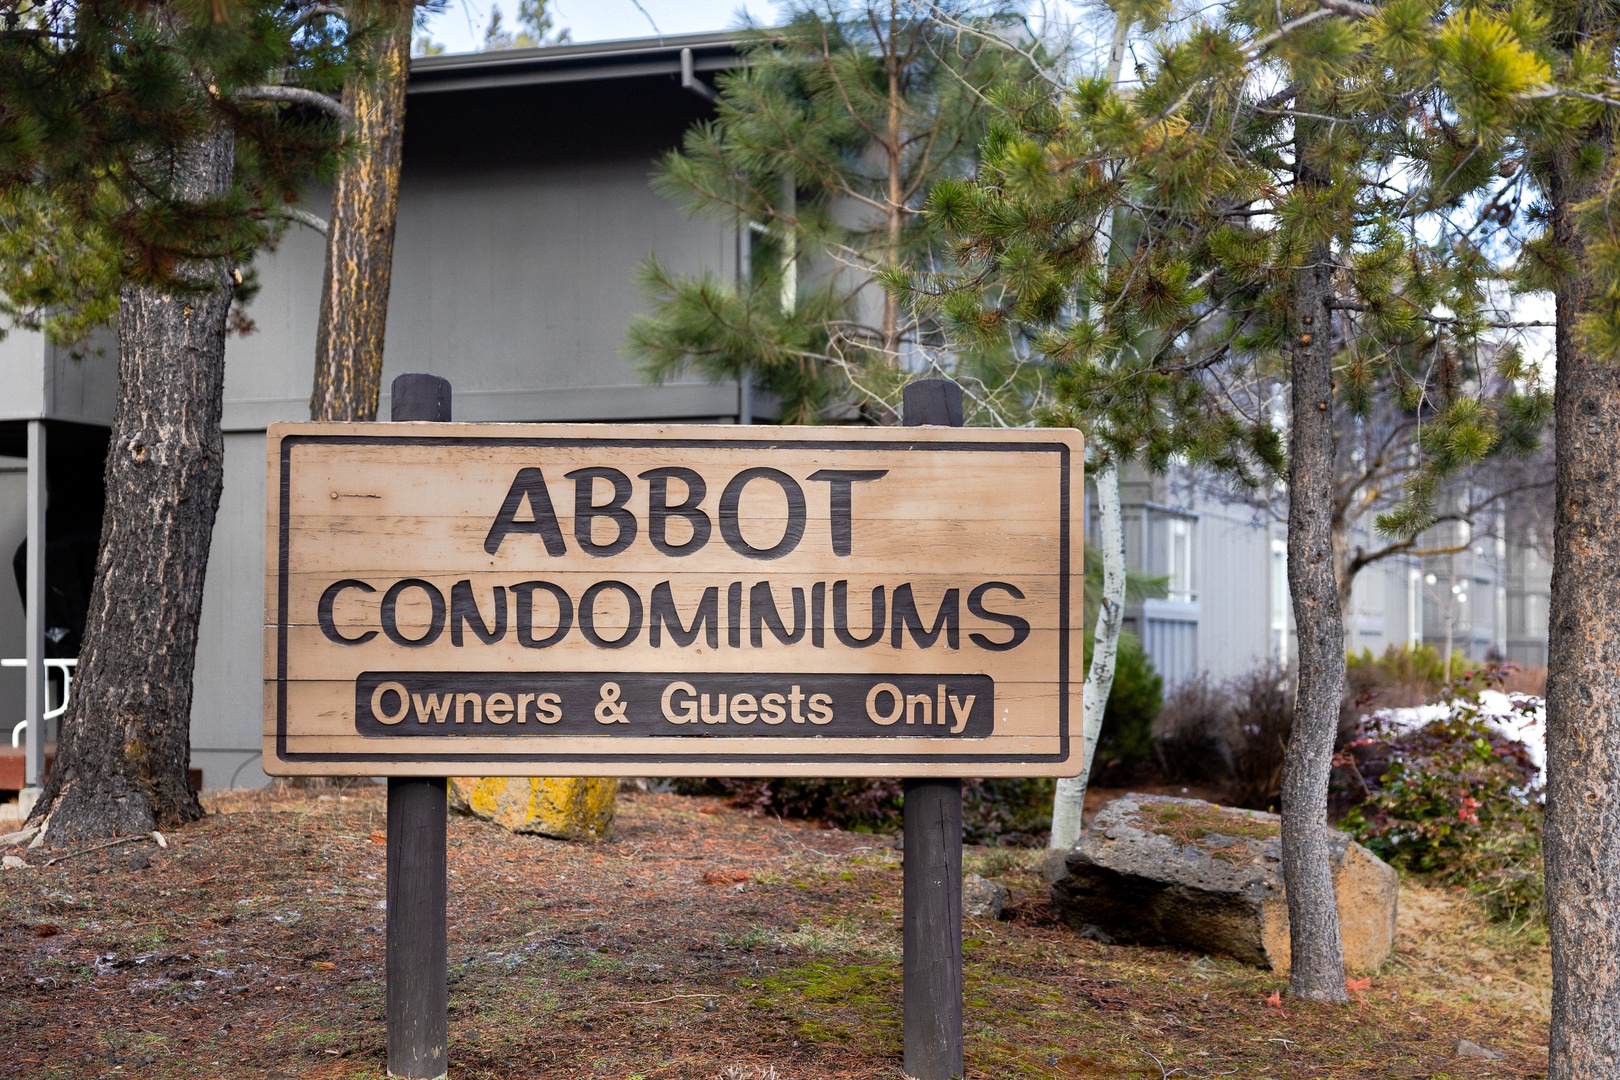 Enjoy your stay at Abbot Condominiums!